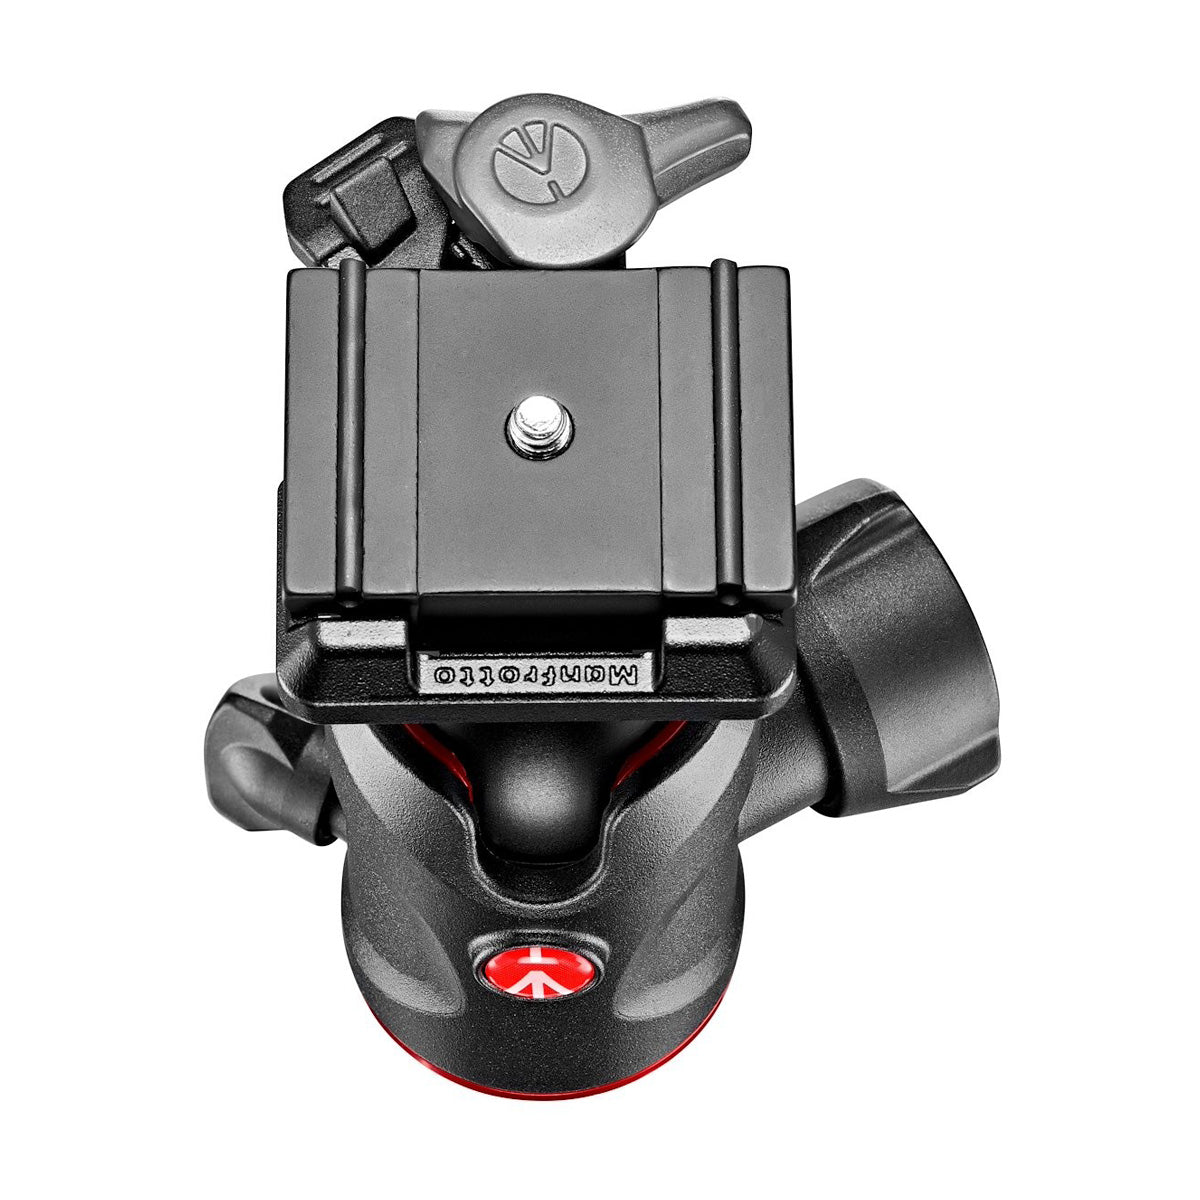 Manfrotto MH496-BHUS Center Ball Head with 200PL-PRO Quick Release Plate